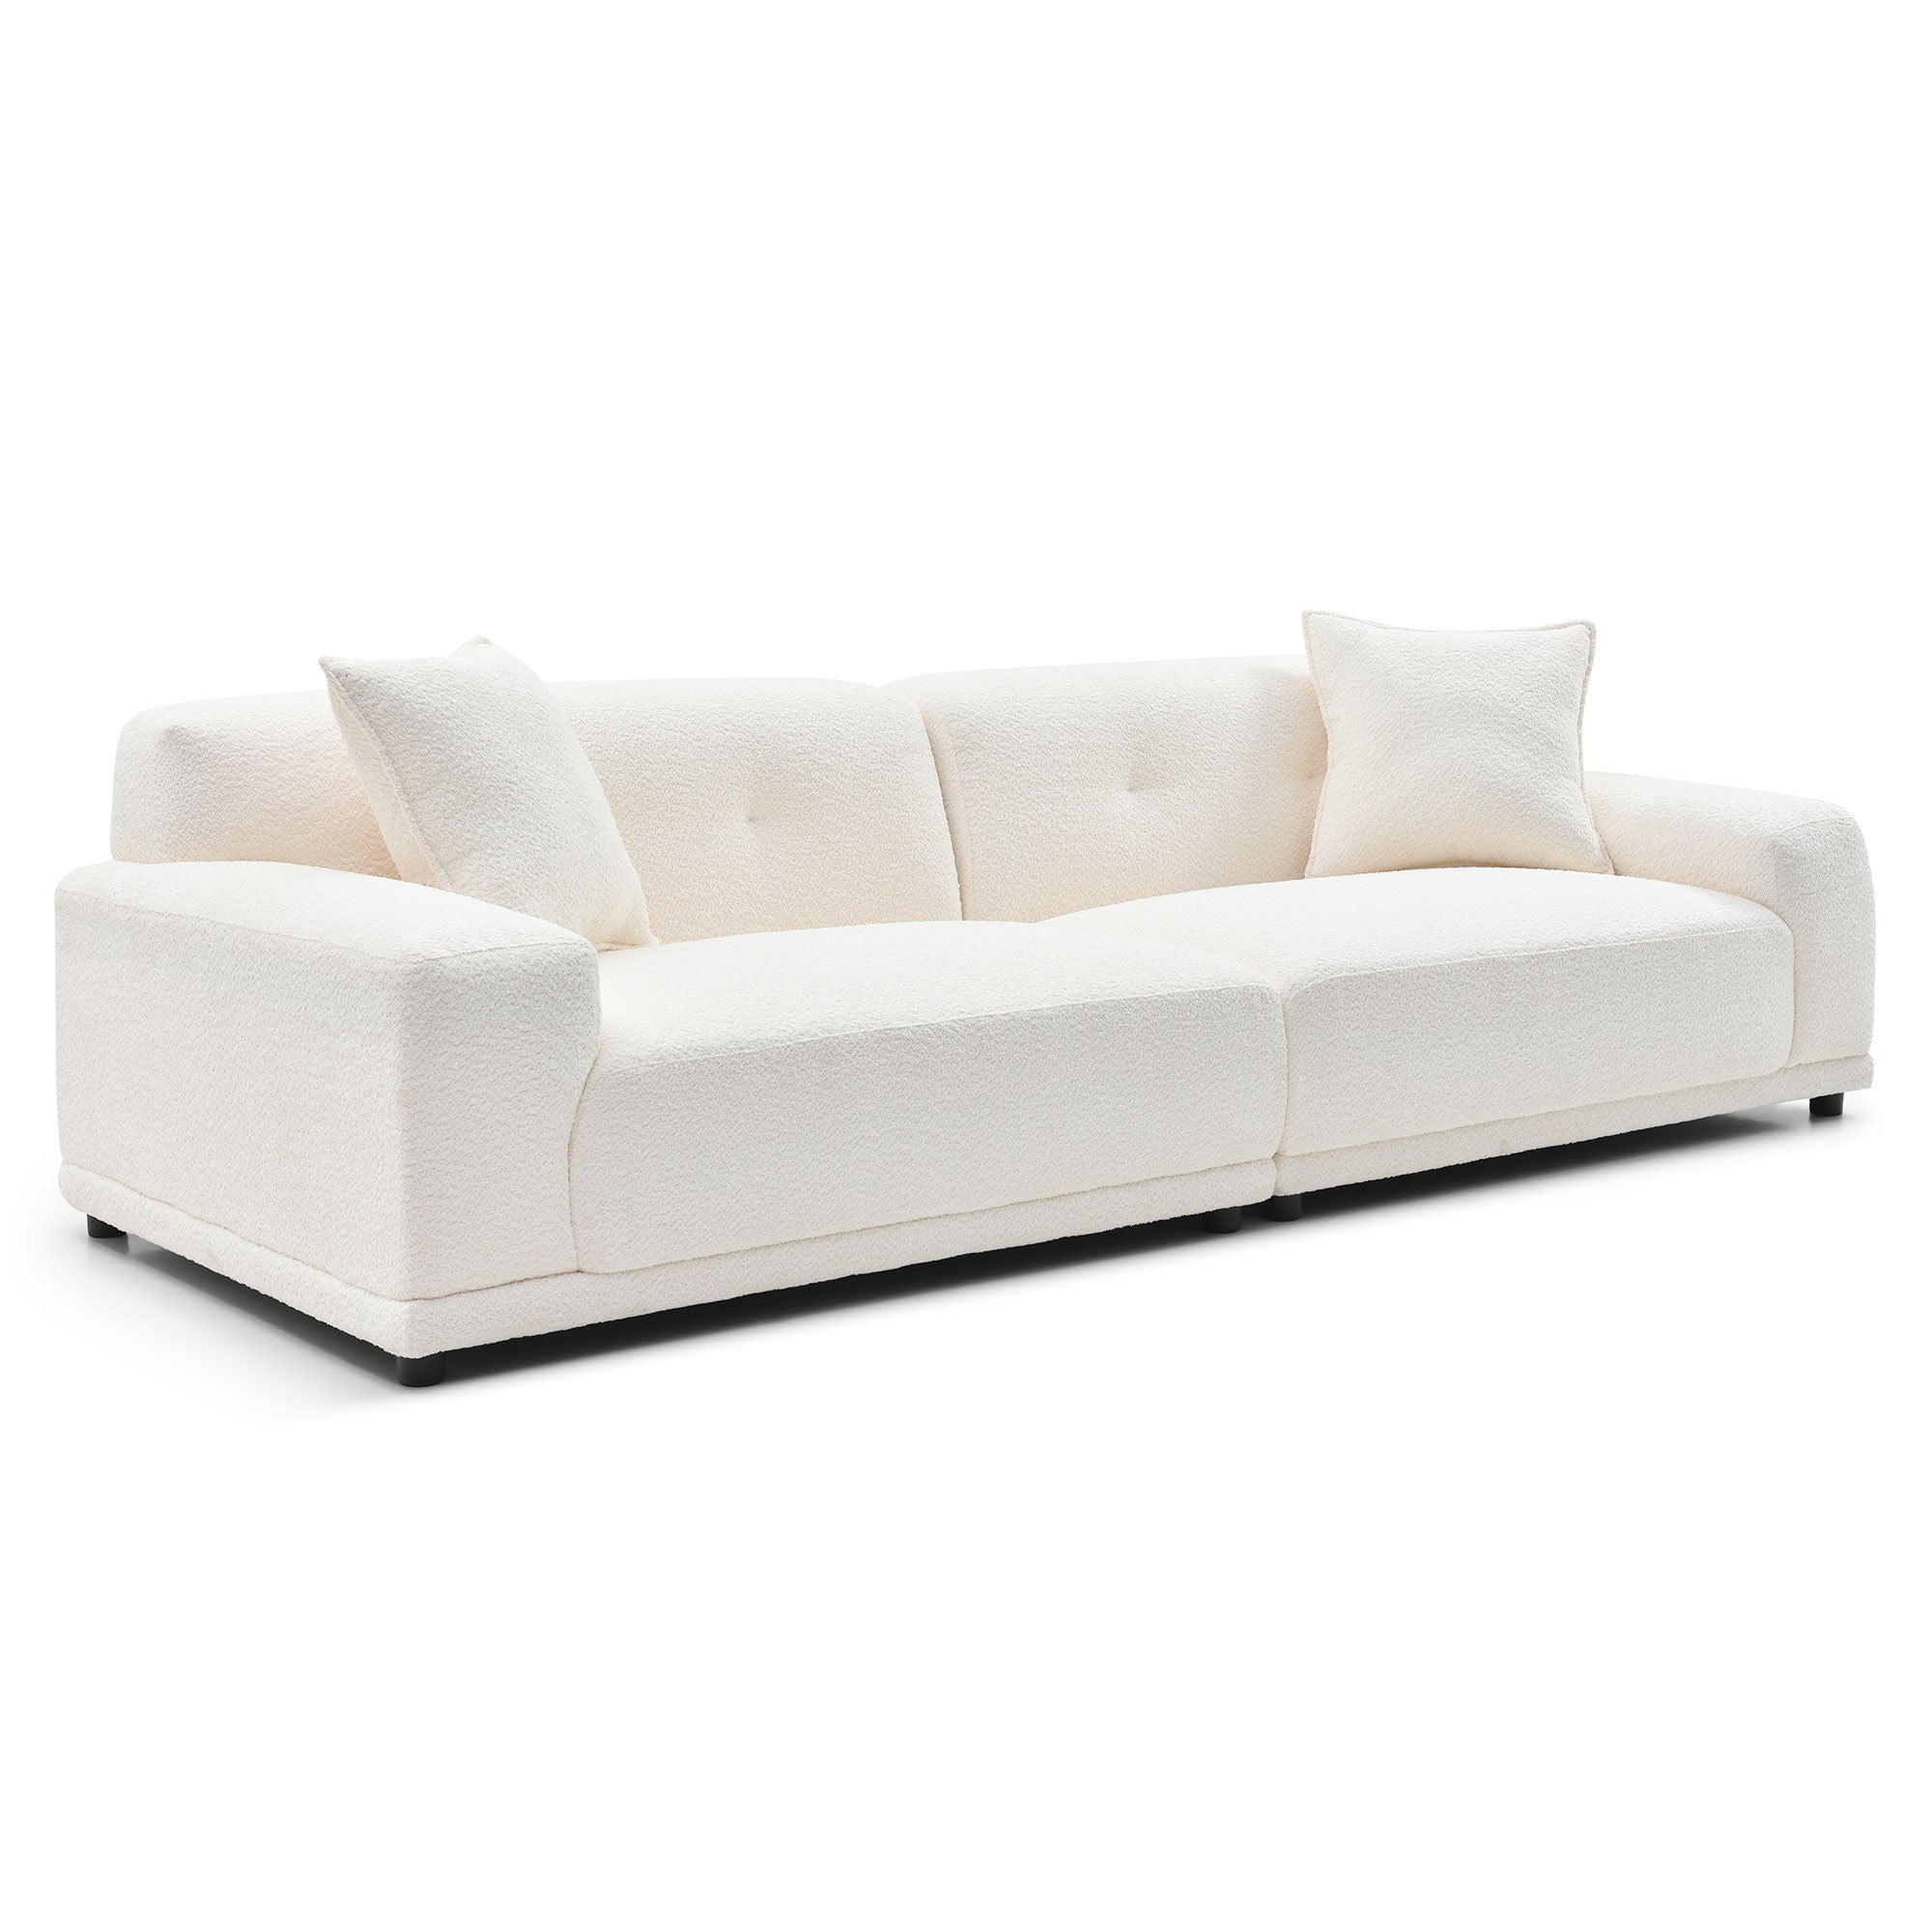 110.23'' Teddy Fleece Couches and Sofas with